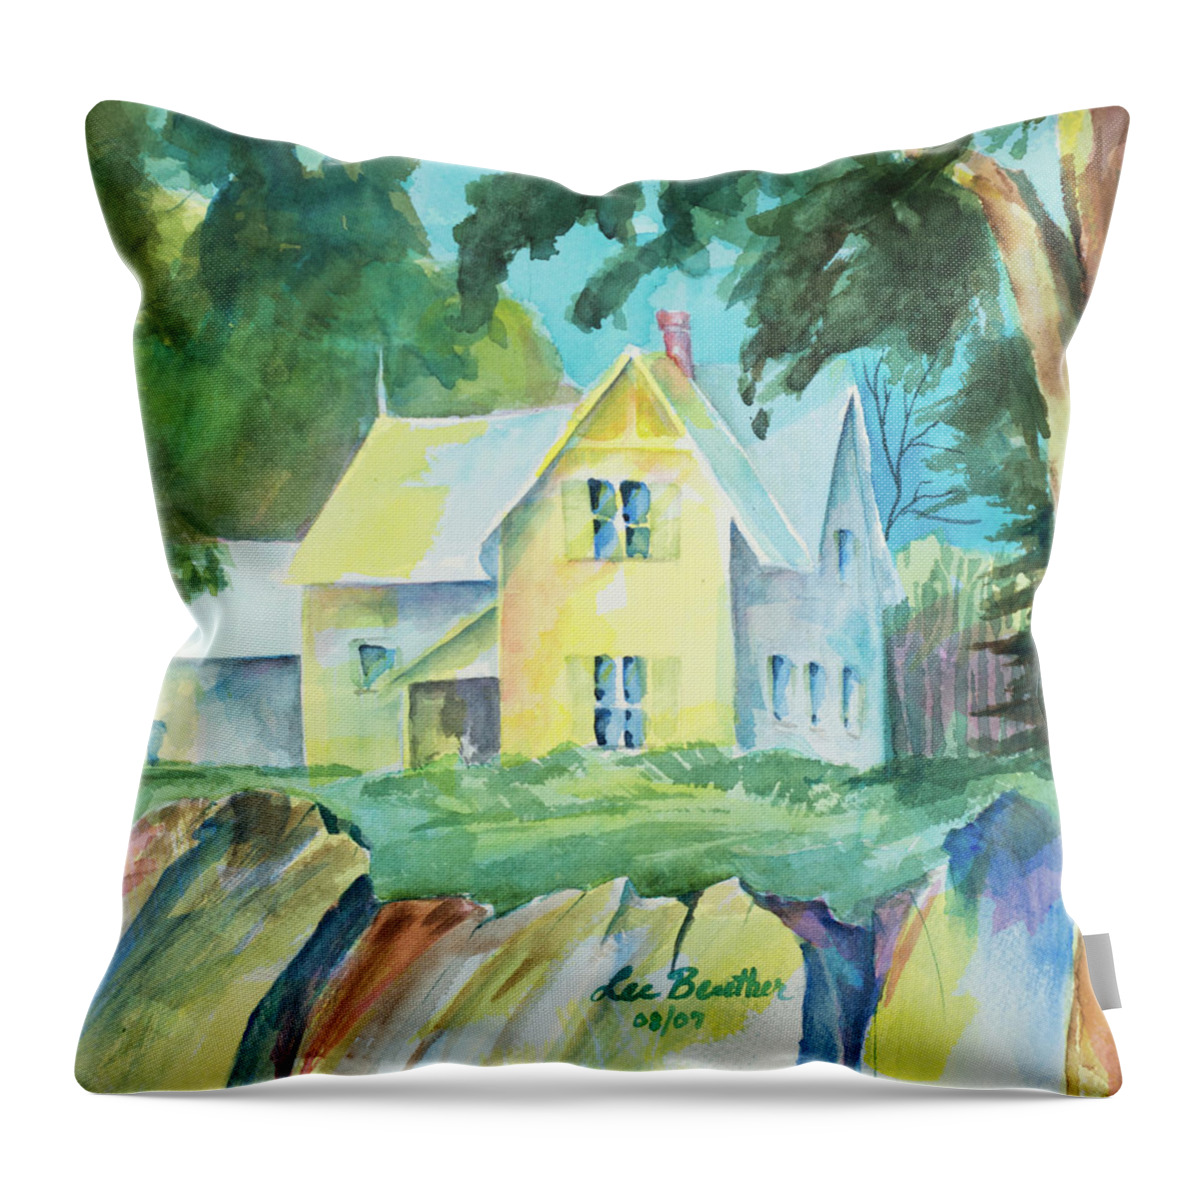 Painting Throw Pillow featuring the painting Marblehead Cottage by Lee Beuther